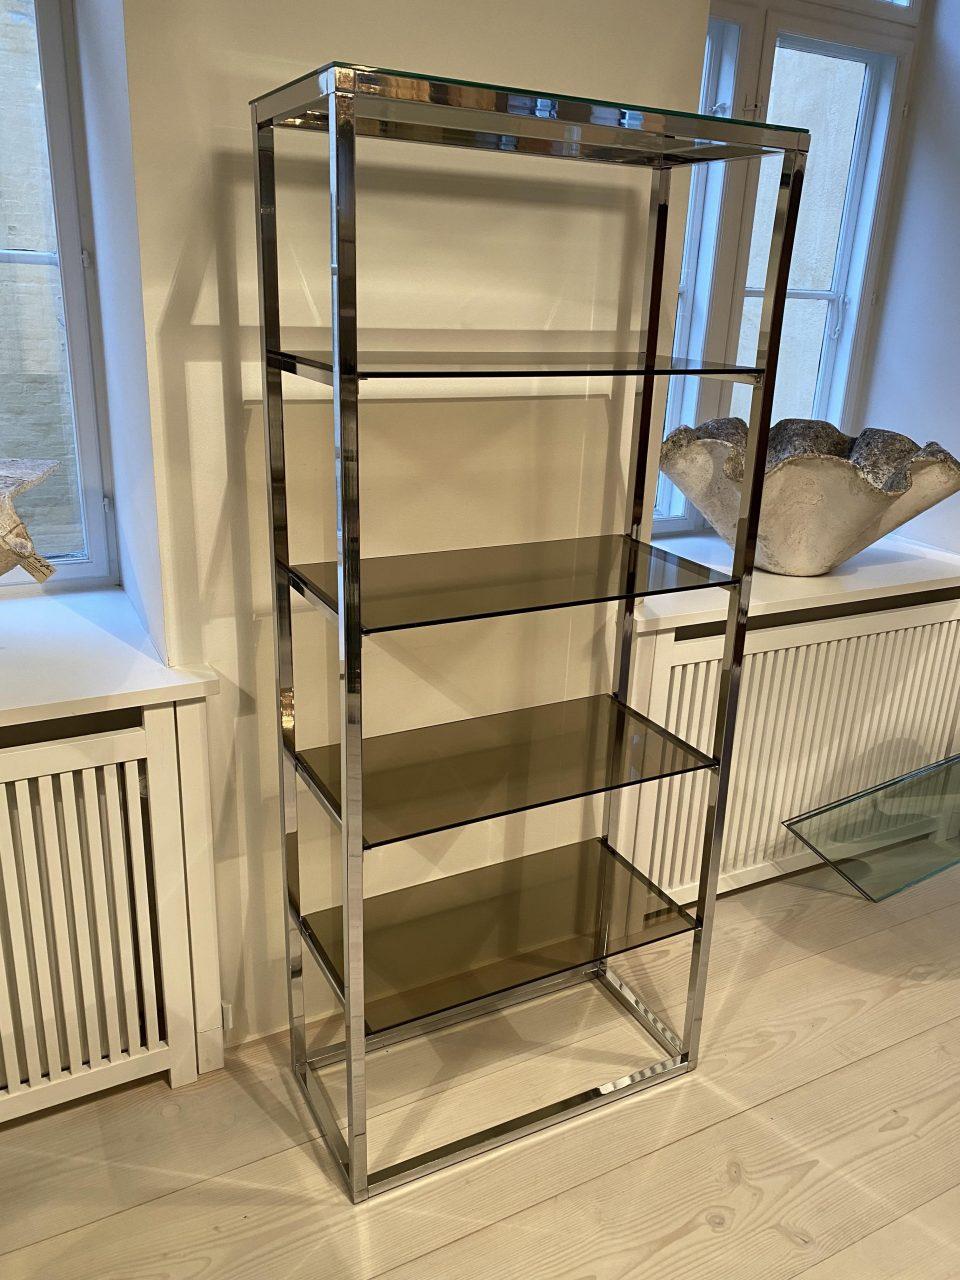 Tall and splendid chrome-plated metal shelf unit, from the late 1960s. Accompanying smoky glass shelves. The design is sleek and elegant, and this piece would look beautiful in a private home, as well as in a shop interior.

The shelving is